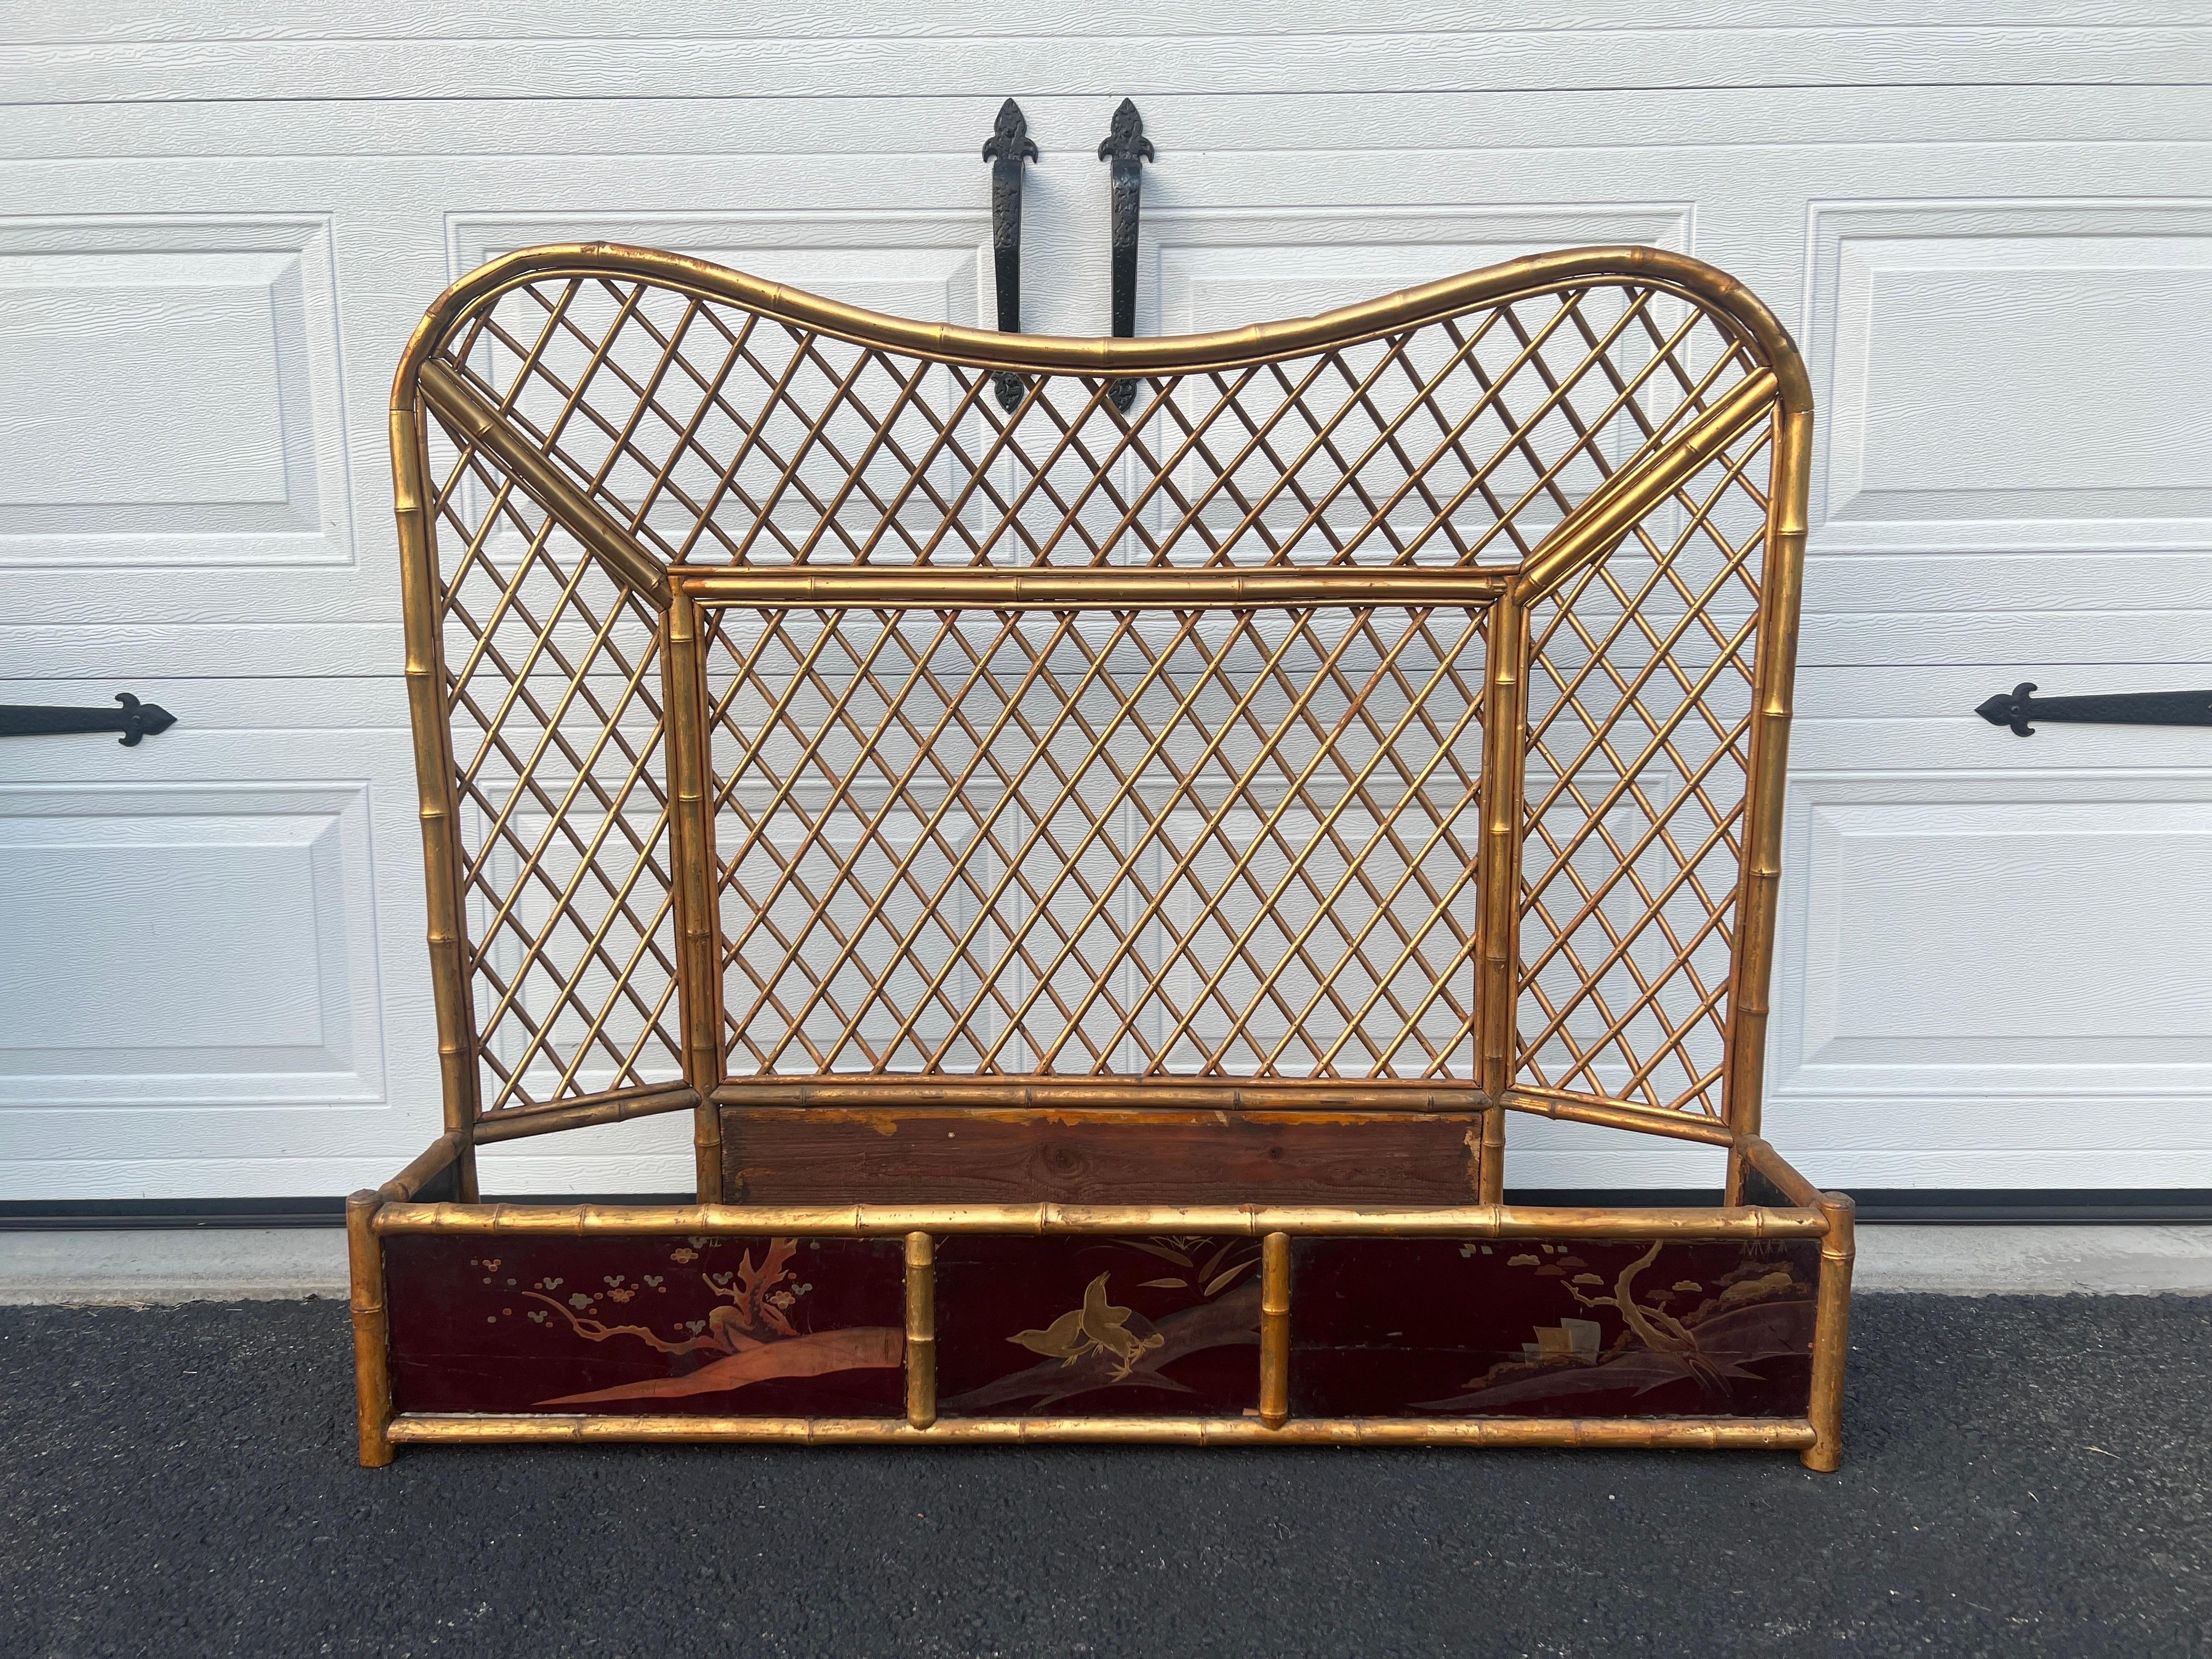 Antique Chinese Fire Screen - 14 For Sale on 1stDibs